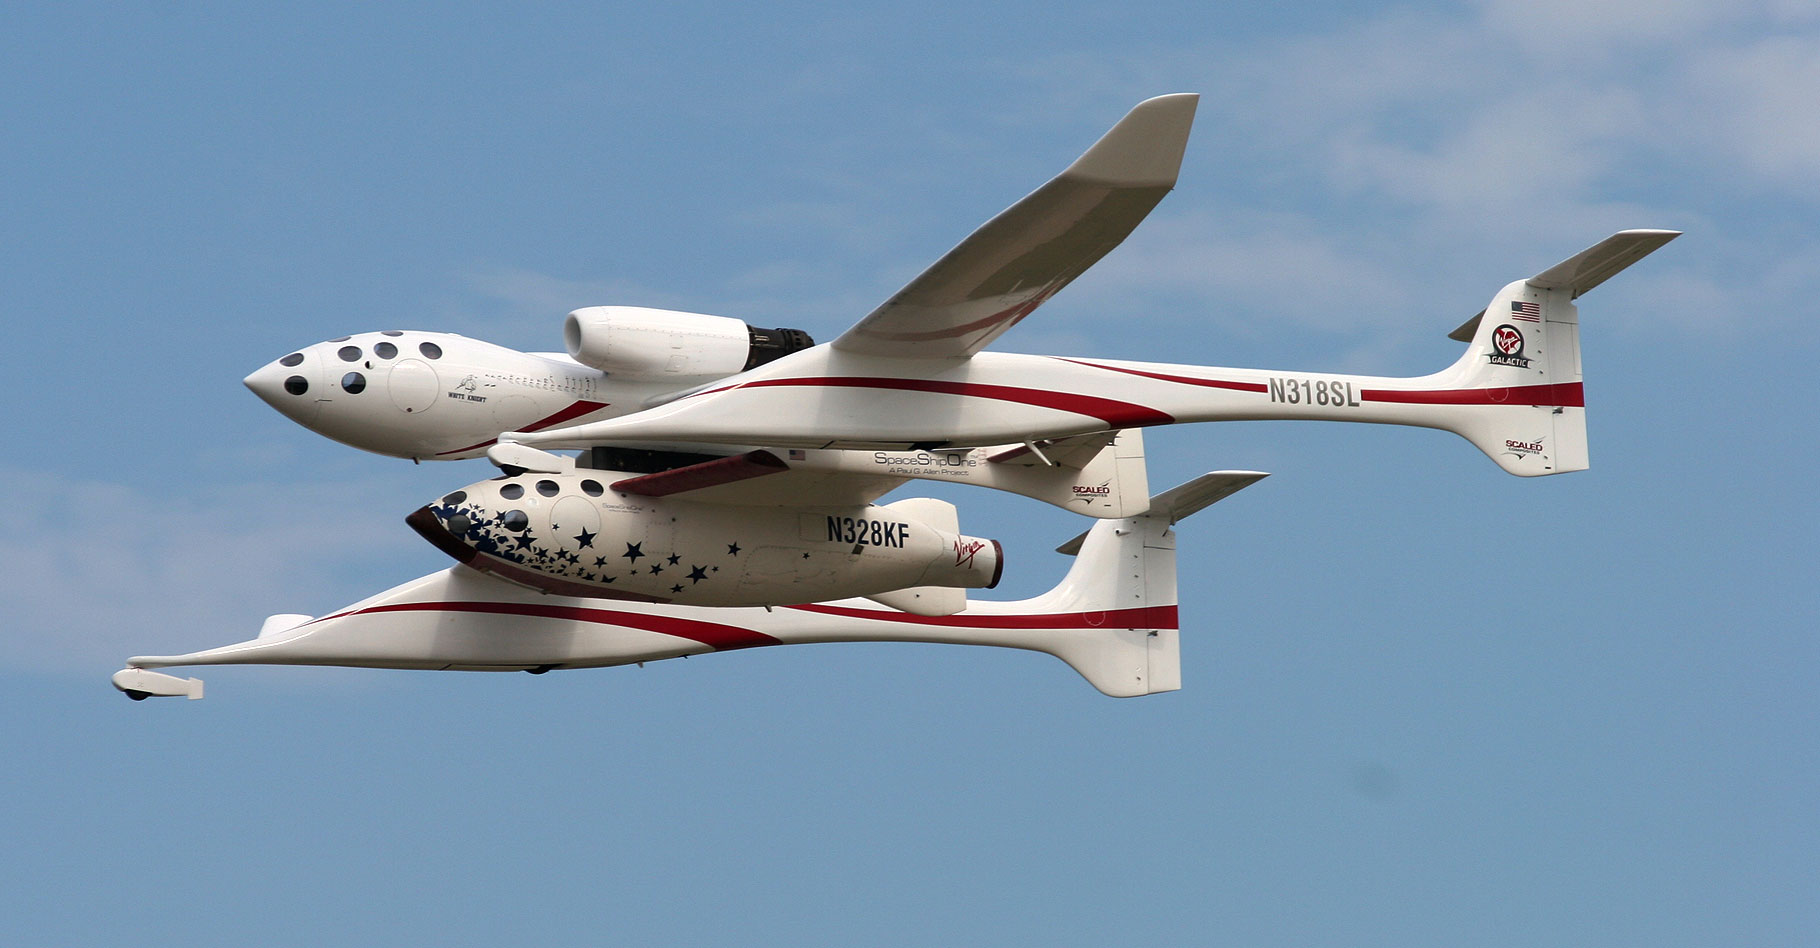 Proteus ET Spaceship One. © Mike Rollinger - CC BY-NC 2.0